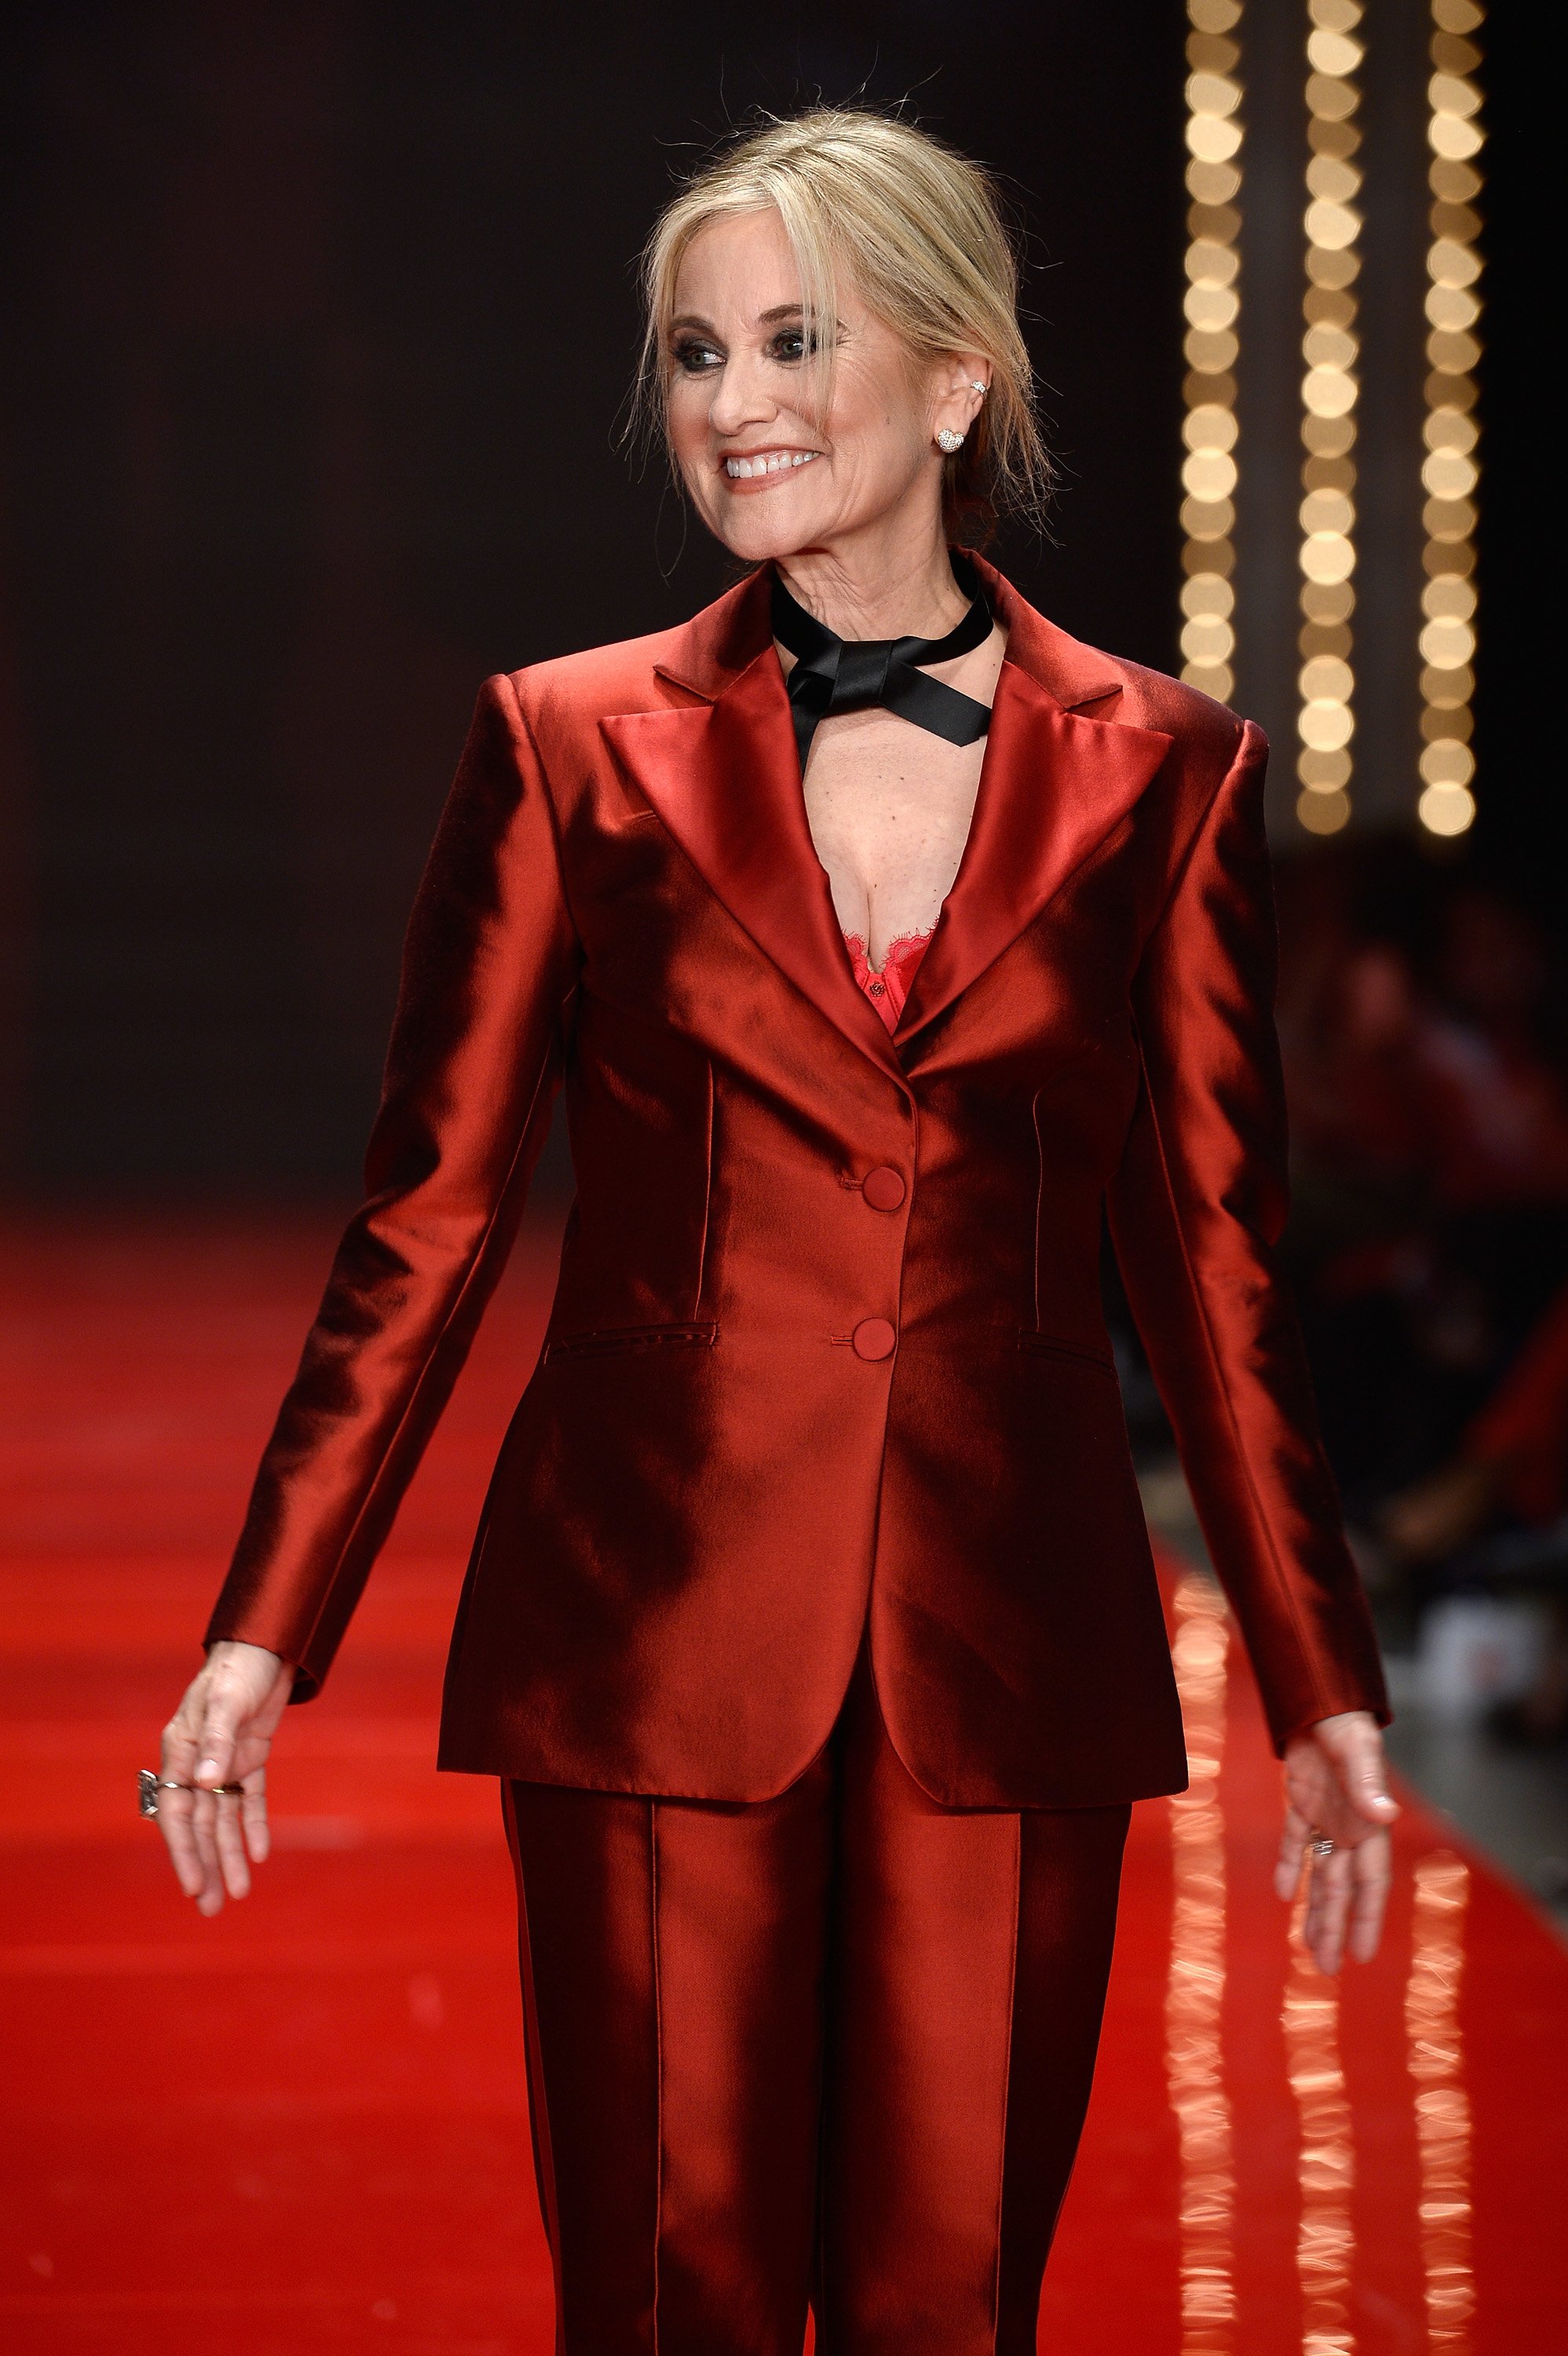 Maureen McCormick walks the runway at the American Heart Association's Go Red For Women Red Dress Collection 2017 presented by Macy's at Fashion Week in New York City at Hammerstein Ballroom on February 9, 2017 in New York City. | Source: Getty Images